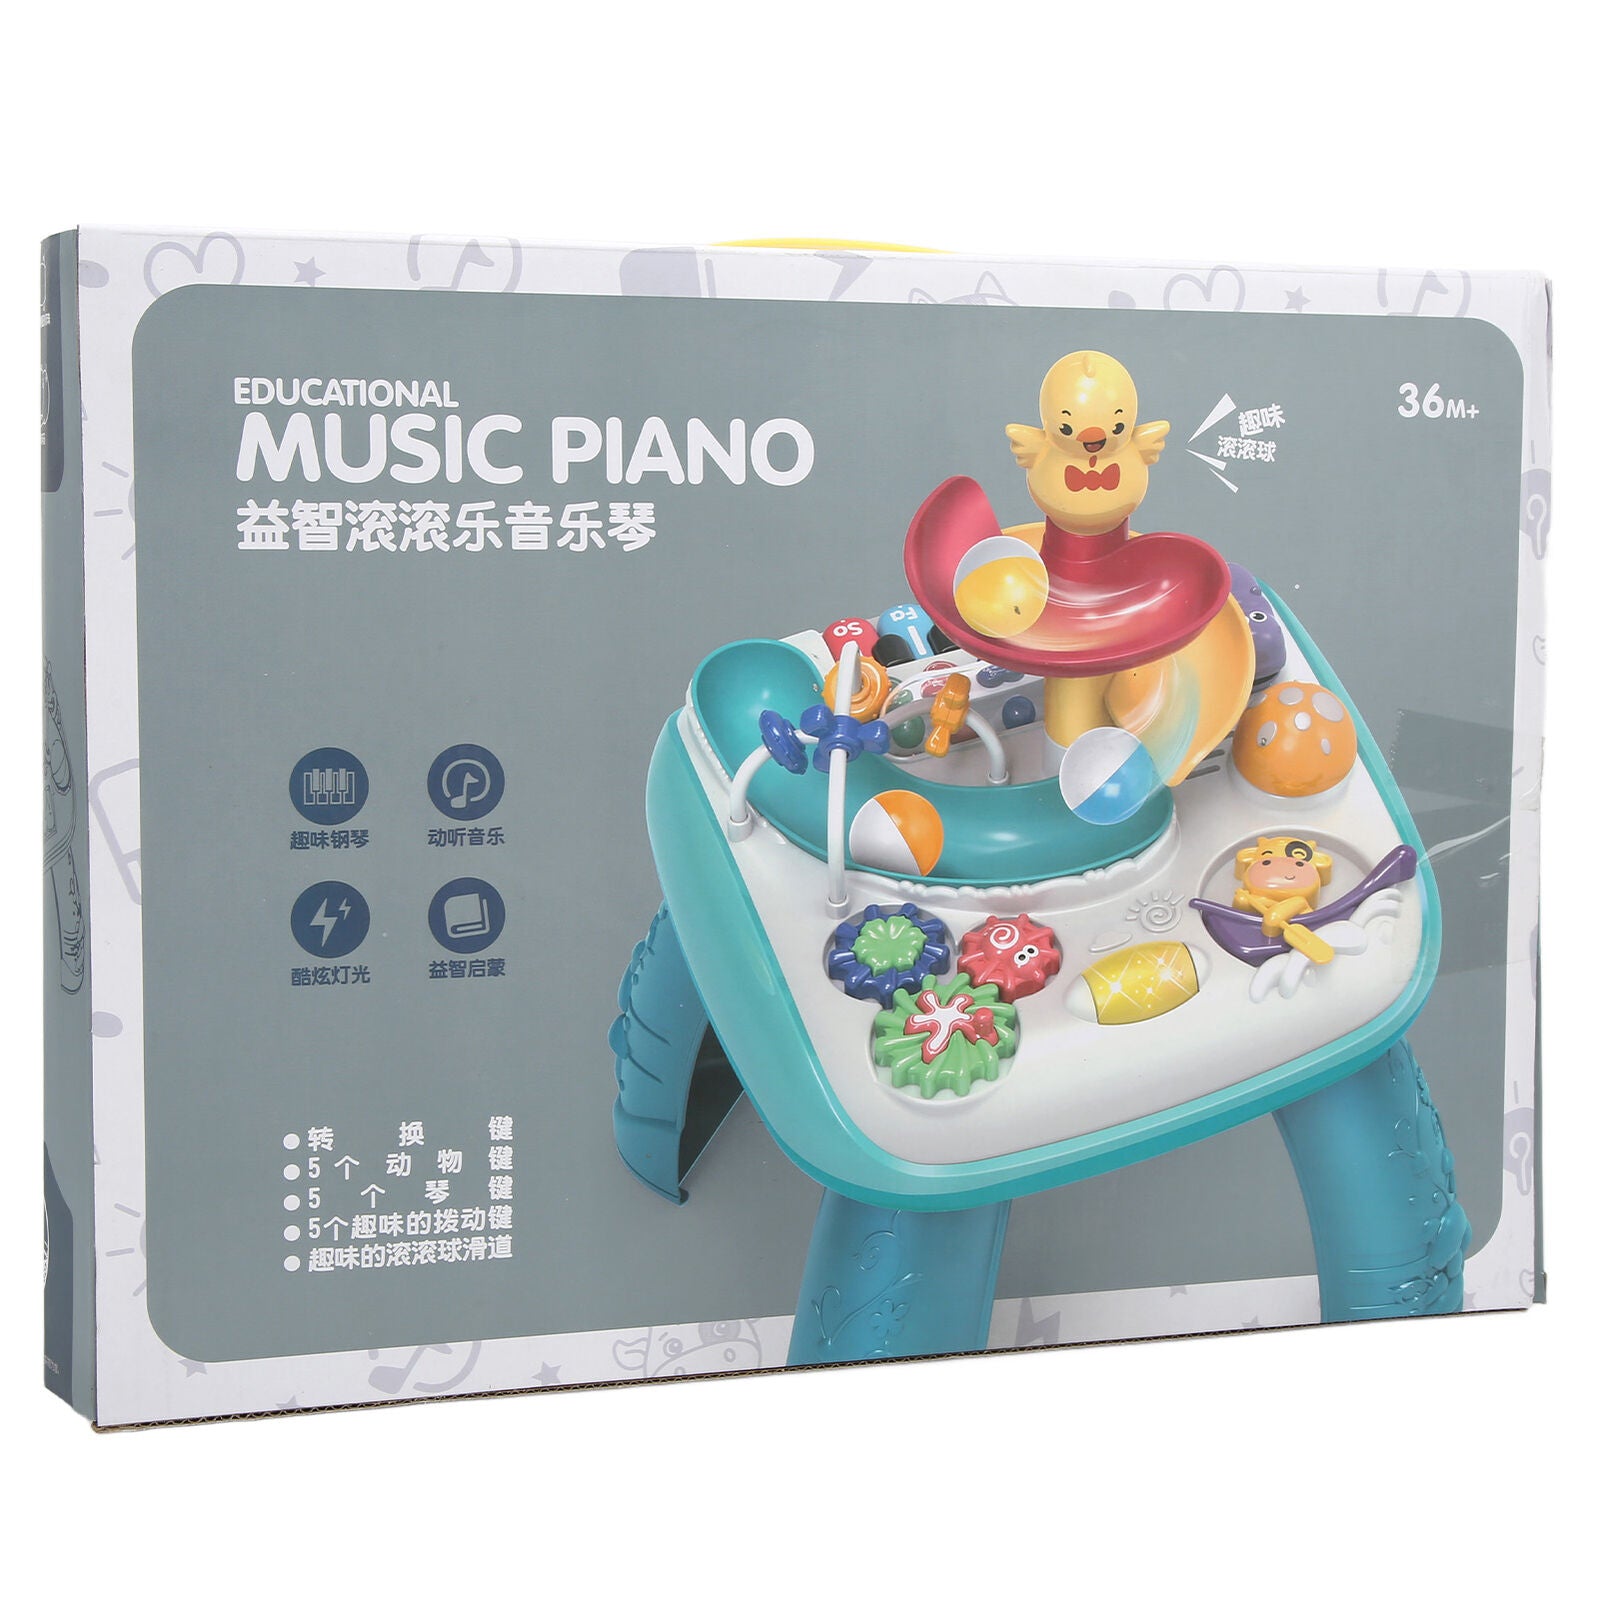 Musical Learning Activity Table Toy Baby Musical Table Toy Endless Fun